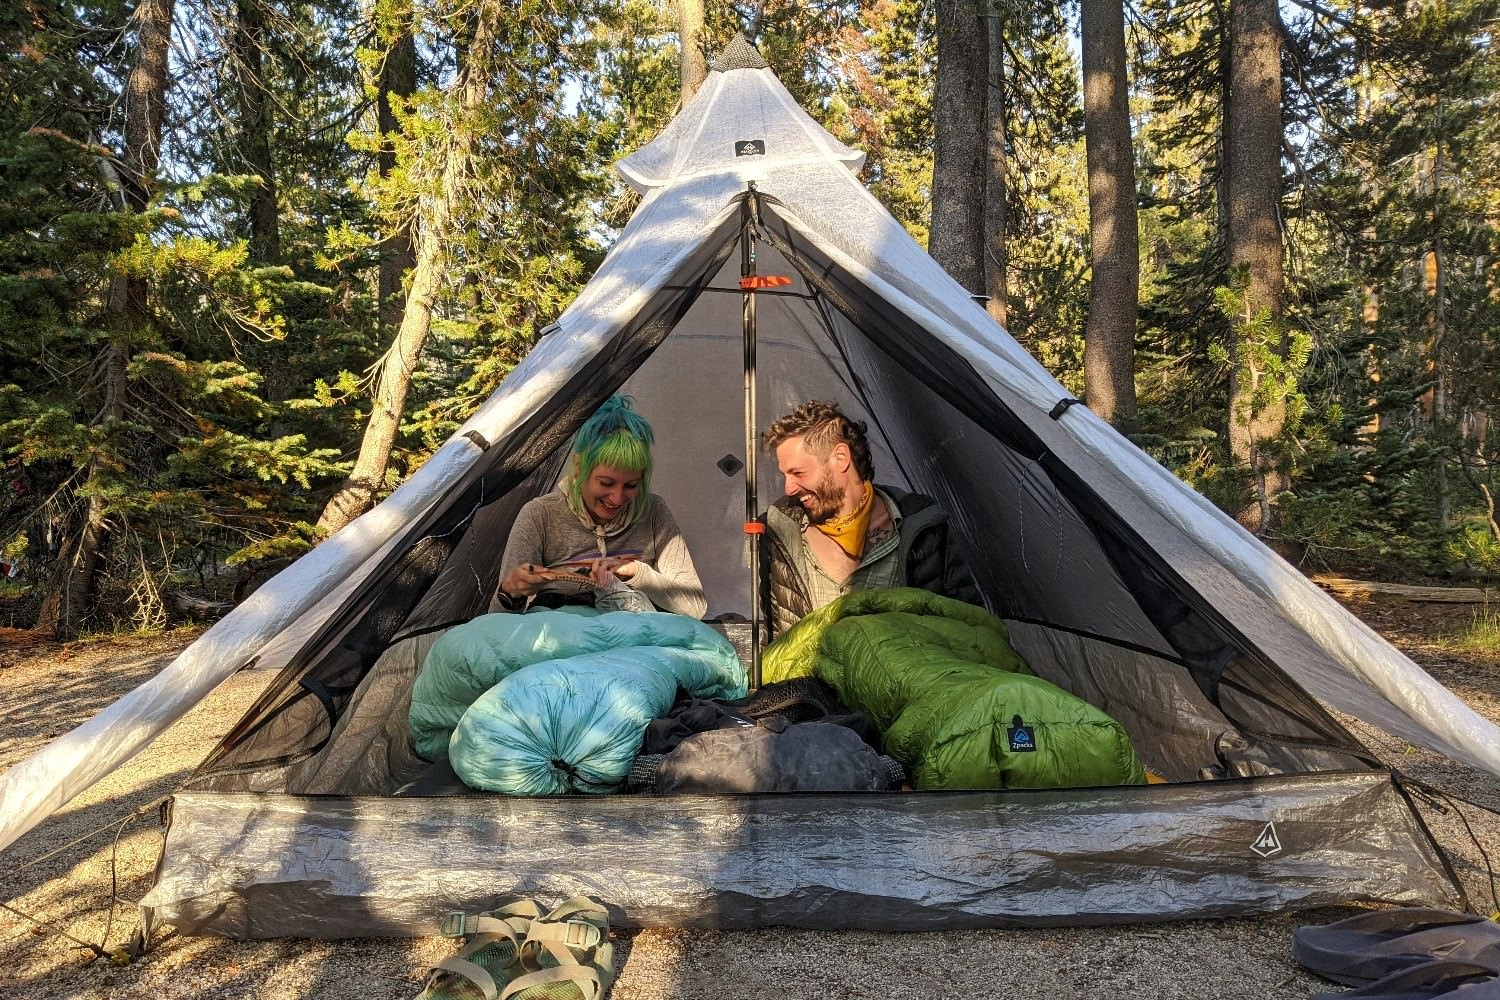 Two hikers sitting in backpacking quilts in a tent